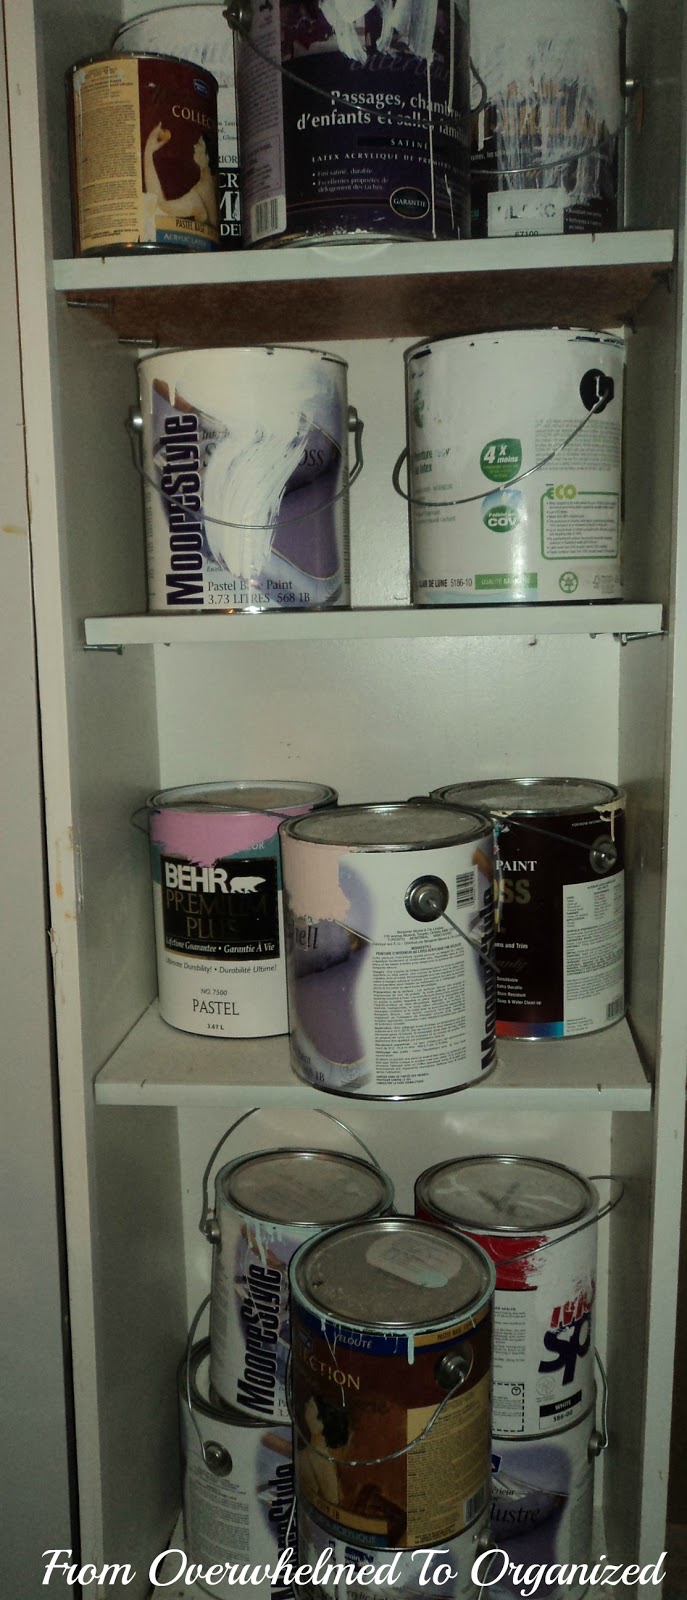 Paint cans take up a lot of space in a garage or basement. A lot of paint can be purged and stored in smaller containers.